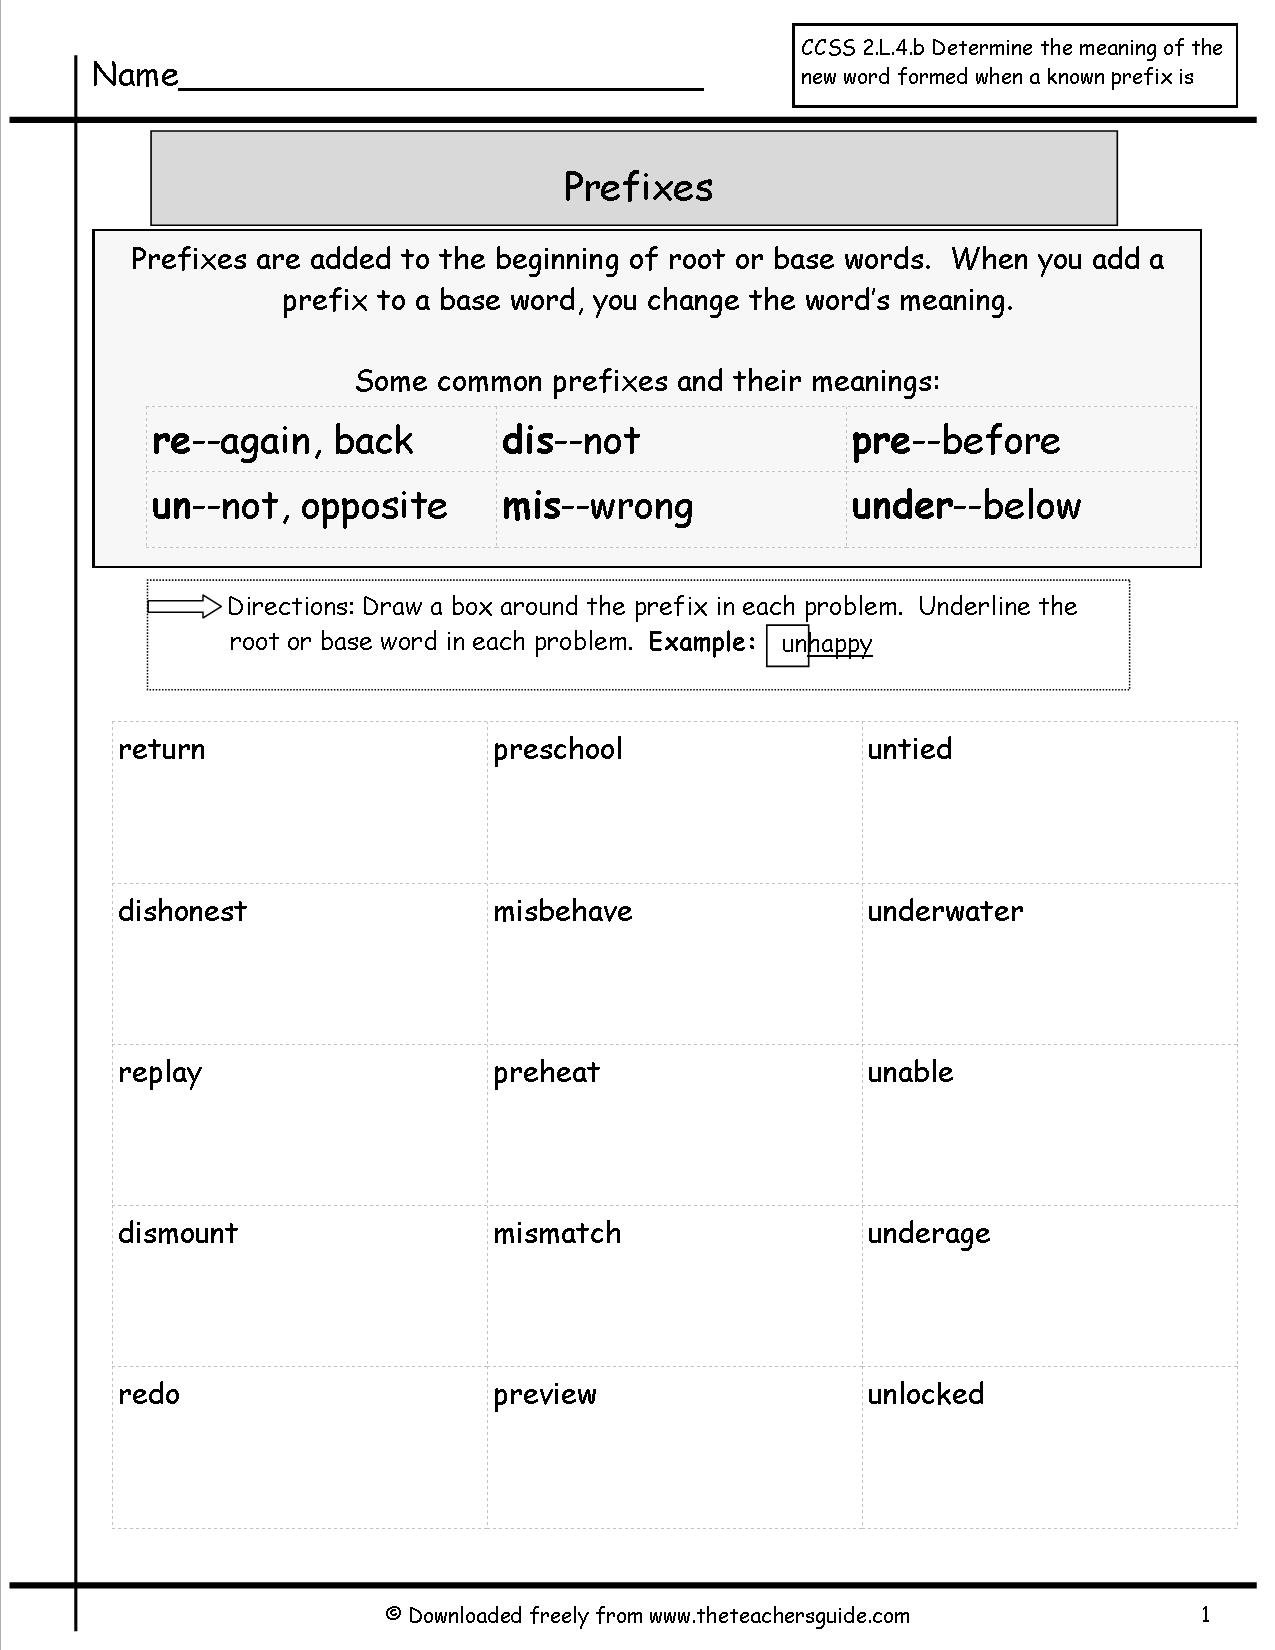 Free Prefixes And Suffixes Worksheets From The Teacher's Guide Or Prefix Worksheets 3Rd Grade